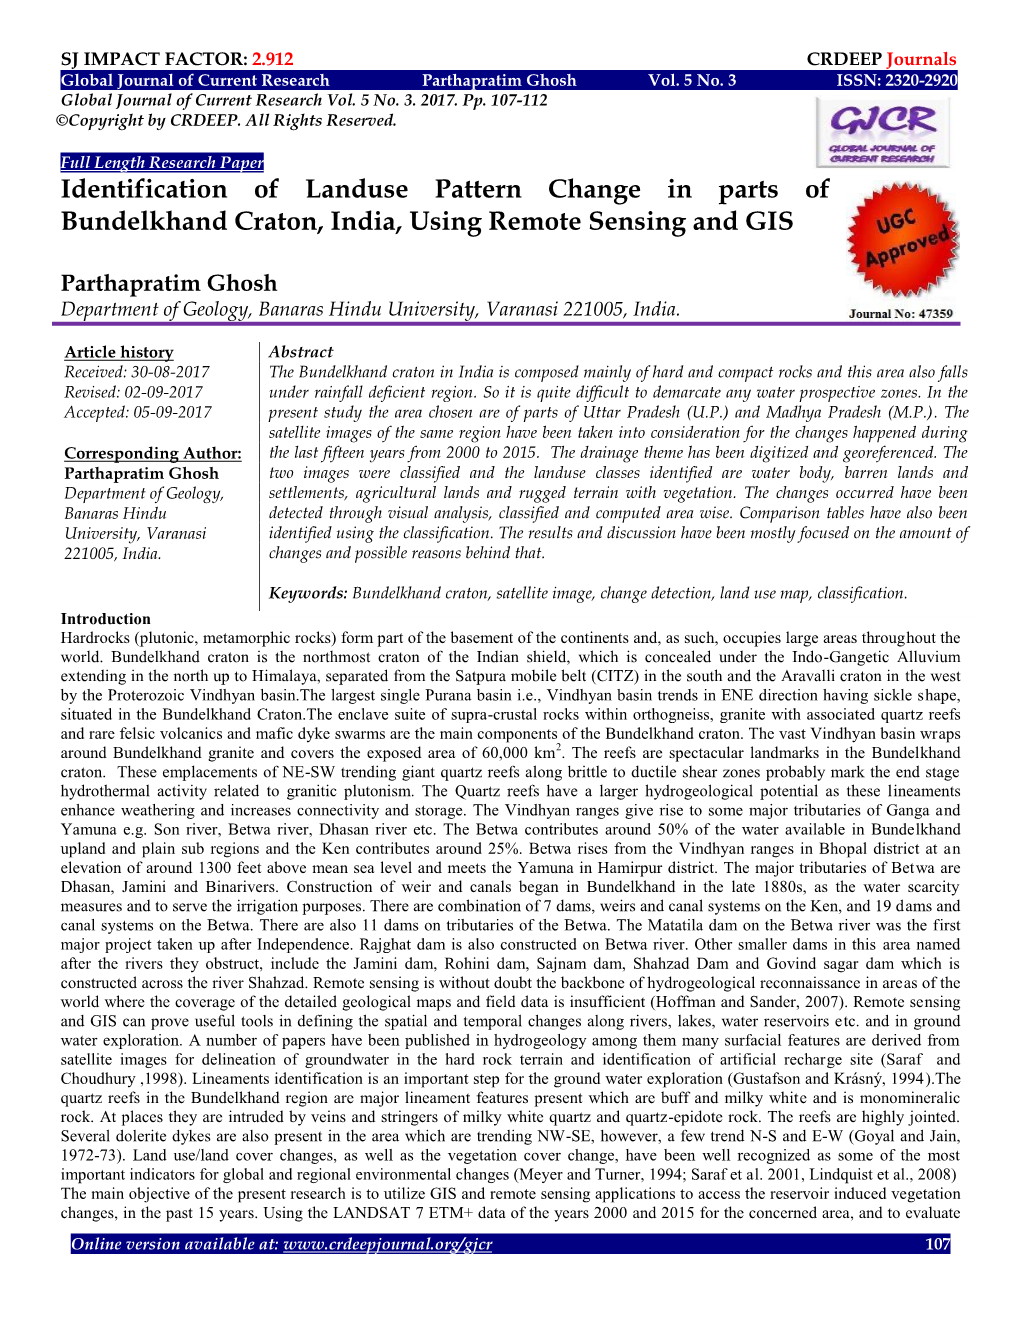 Identification of Landuse Pattern Change in Parts of Bundelkhand Craton, India, Using Remote Sensing and GIS